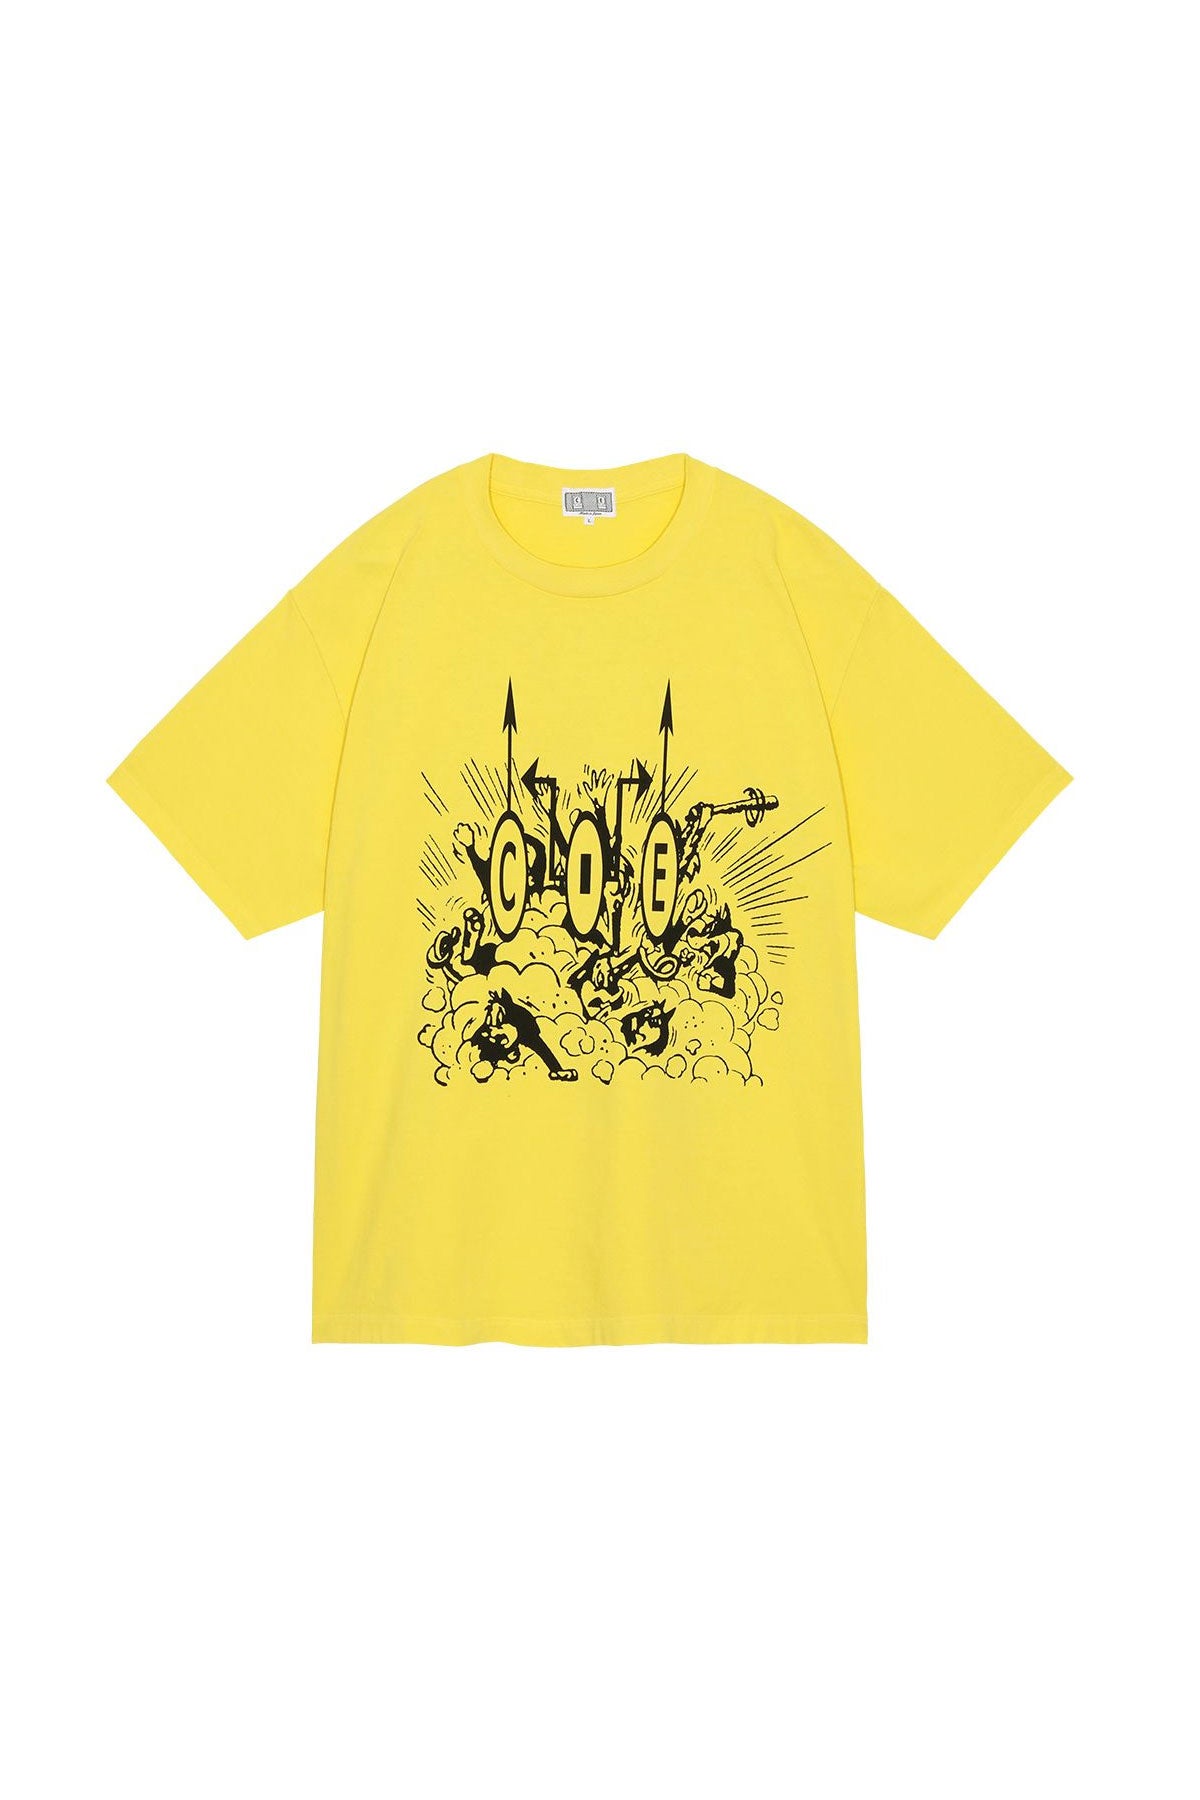 The CAV EMPT - OVERDYE END IN ITSELF T  available online with global shipping, and in PAM Stores Melbourne and Sydney.